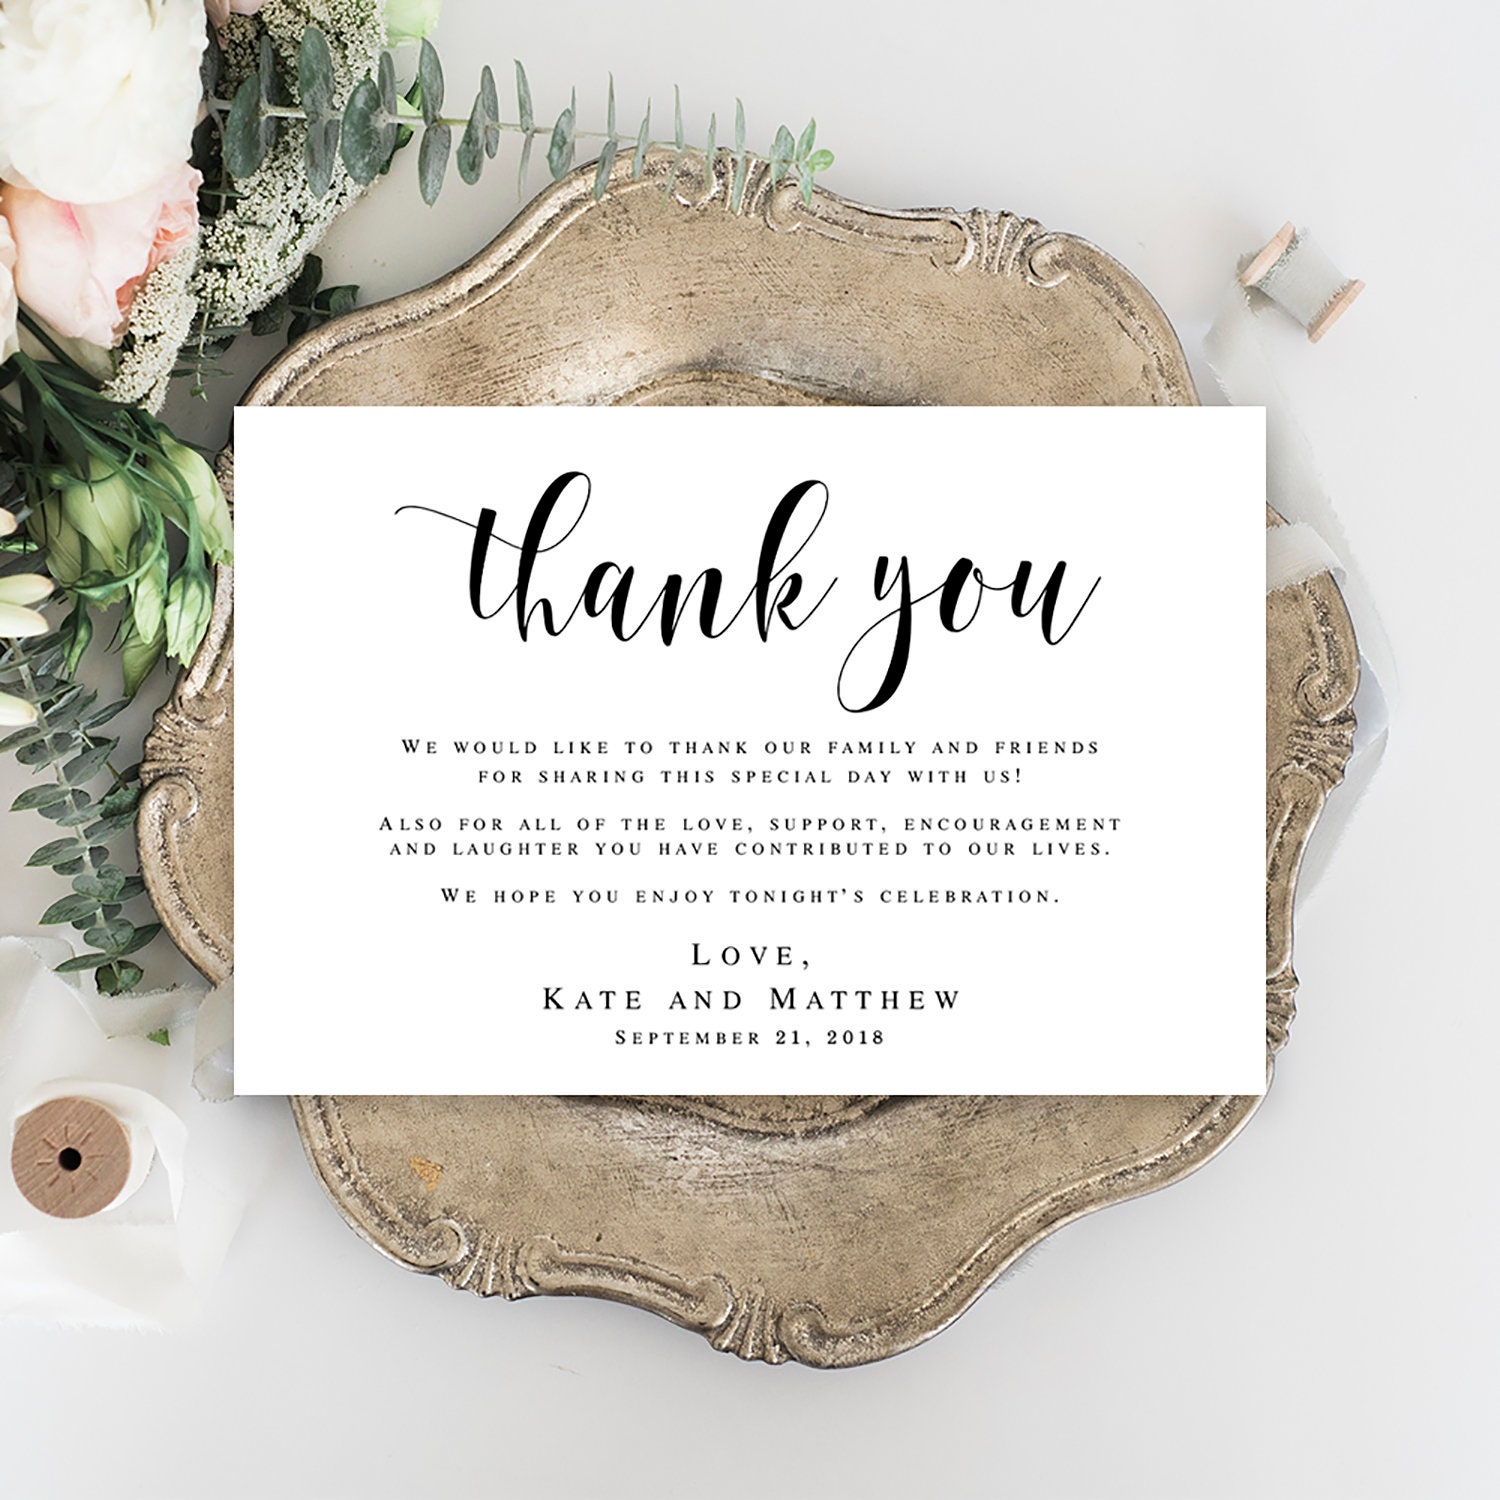 Wedding Thank You Letters Instant Download Editable Templates Etsy